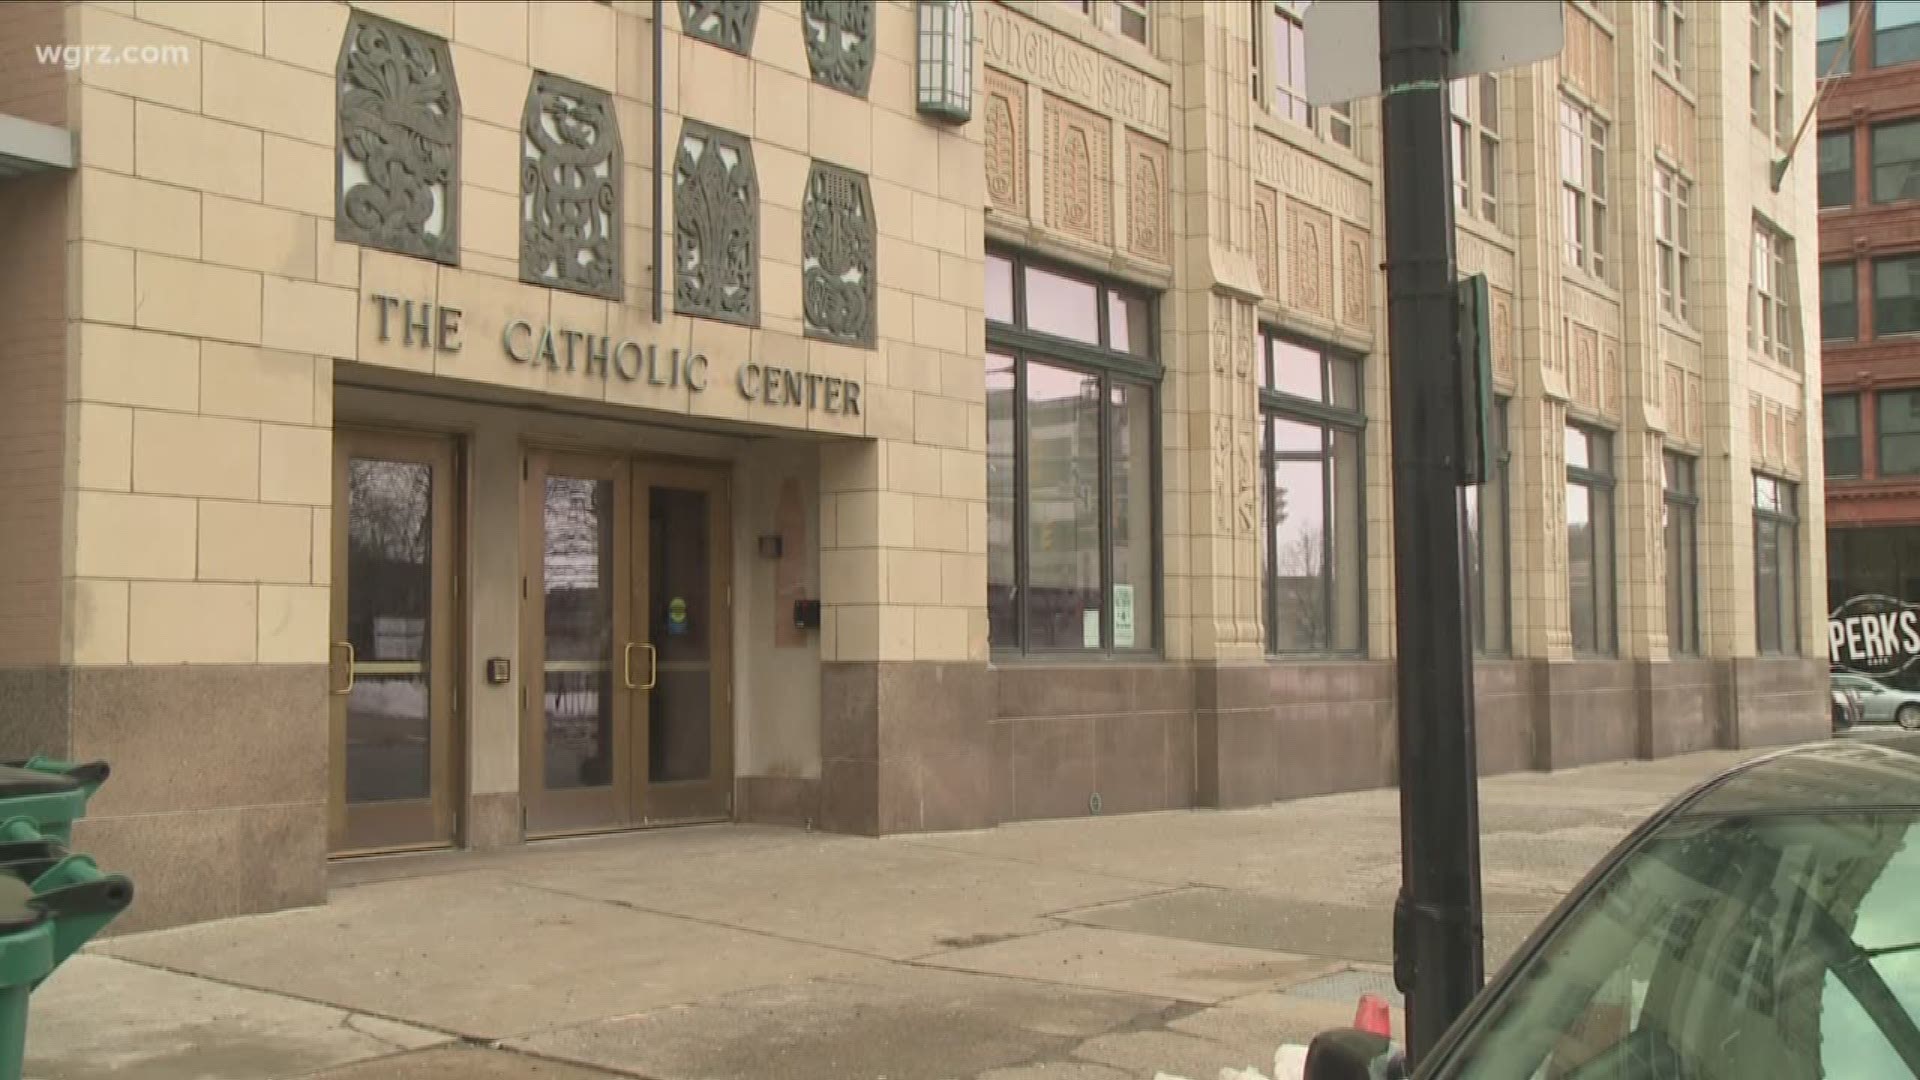 Feds Investigate Buffalo Diocese